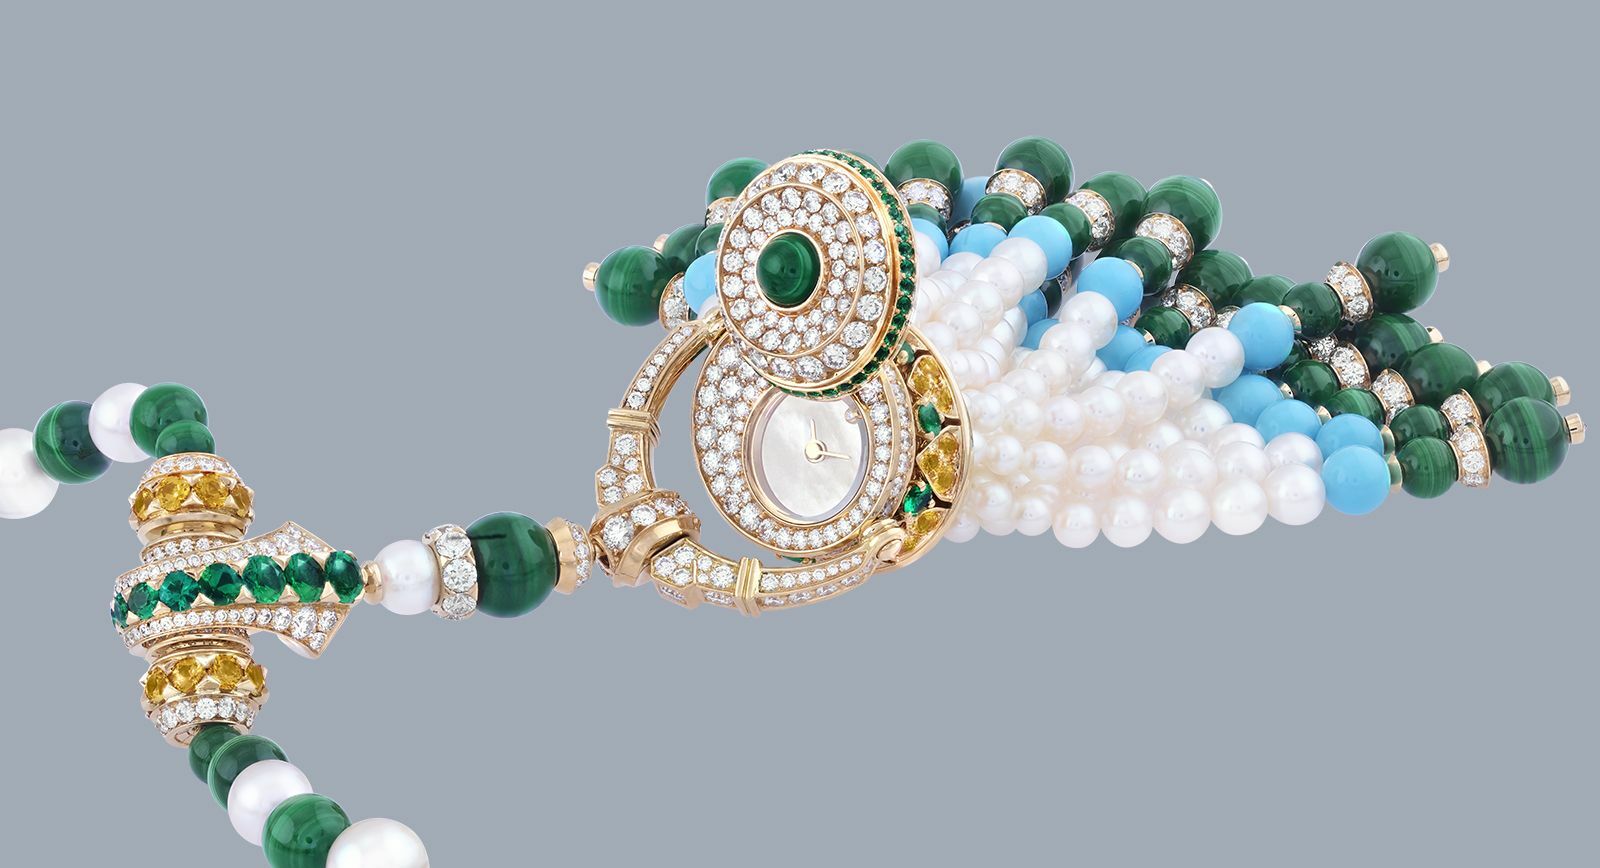 Van Cleef & Arpels Pompon Gaia transformable long necklace watch in yellow gold with yellow sapphires, emeralds, malachite, turquoise, white cultured pearls, white mother-of-pearl, diamonds and a quartz movement.